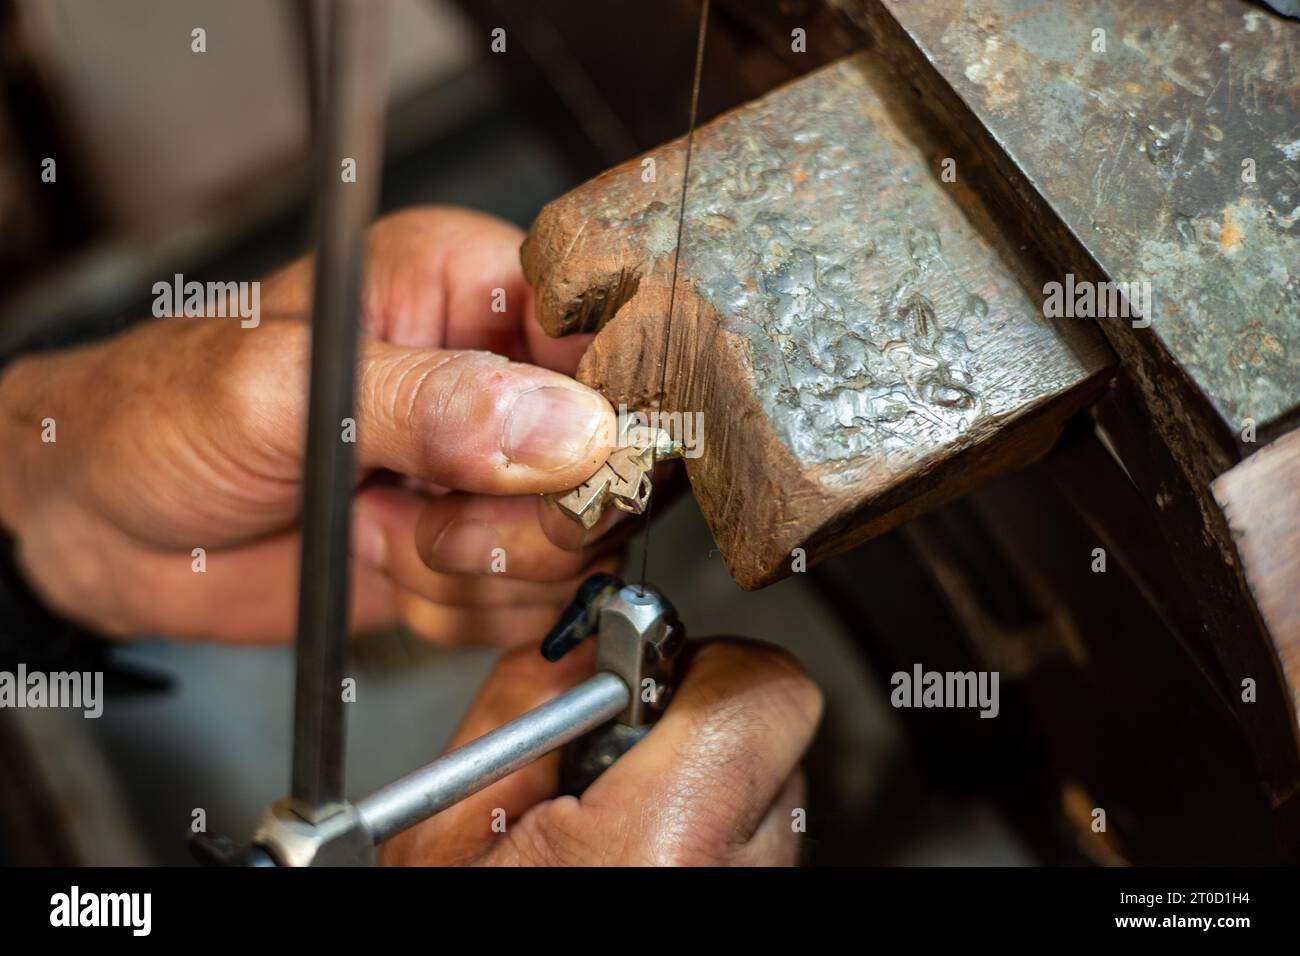 Goldsmith working and creating in his crafting gold jewelry workshop. Jeweler sawing a silver jewel. Stock Photo